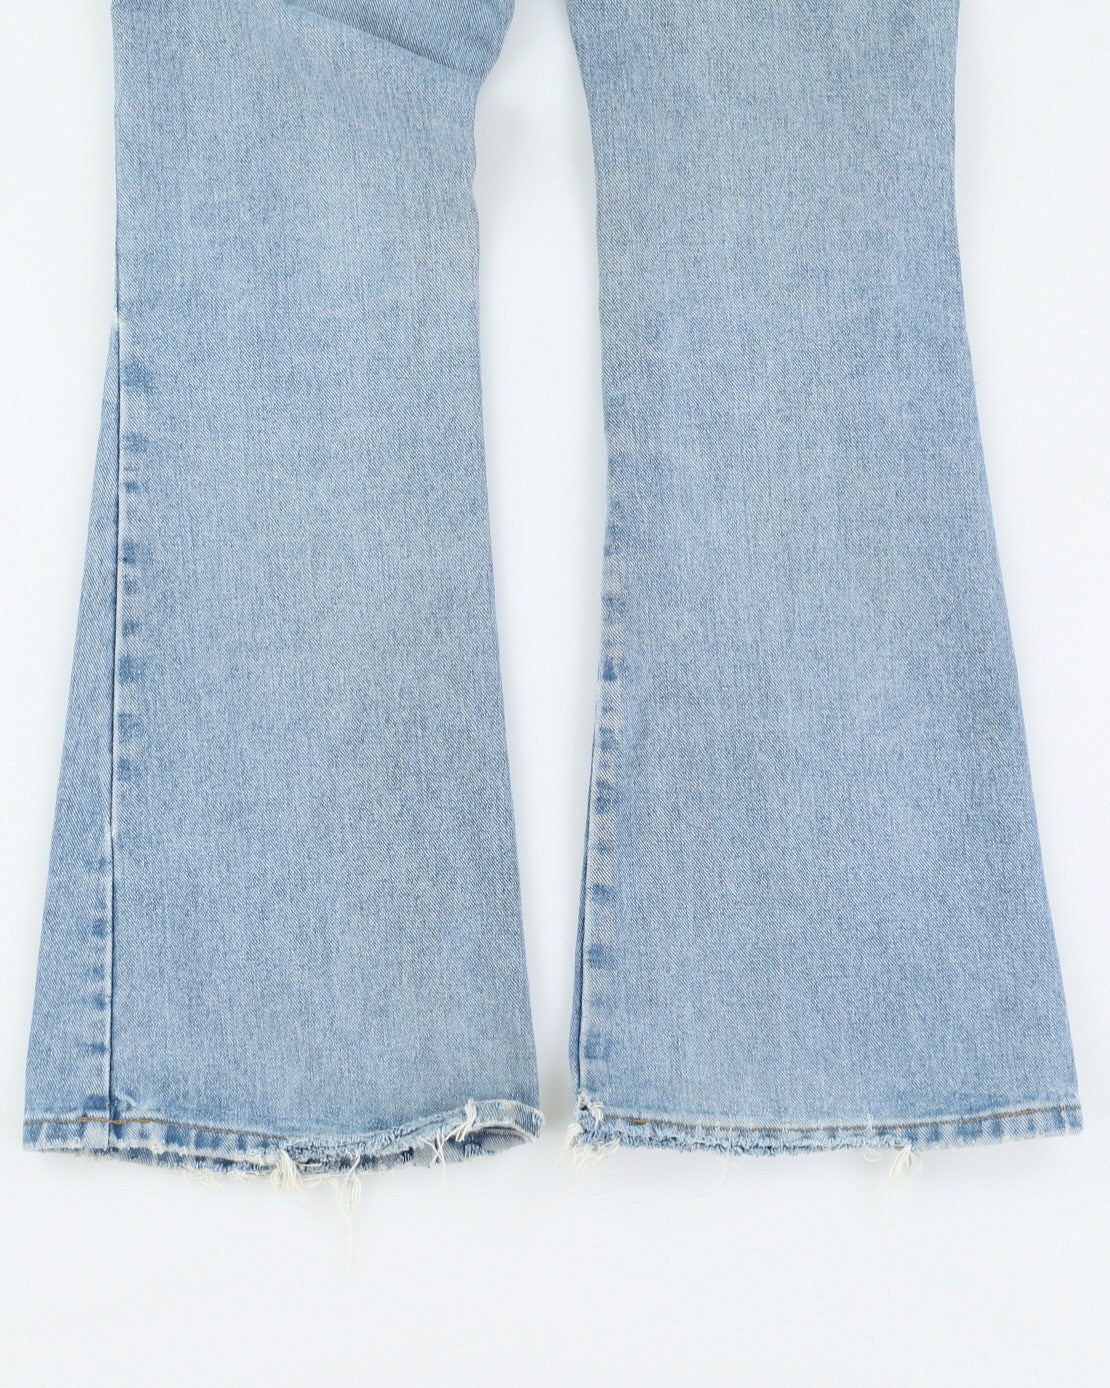 Y2K 00s Pepe Jeans Low Rise Light Wash Flares - W27 L31